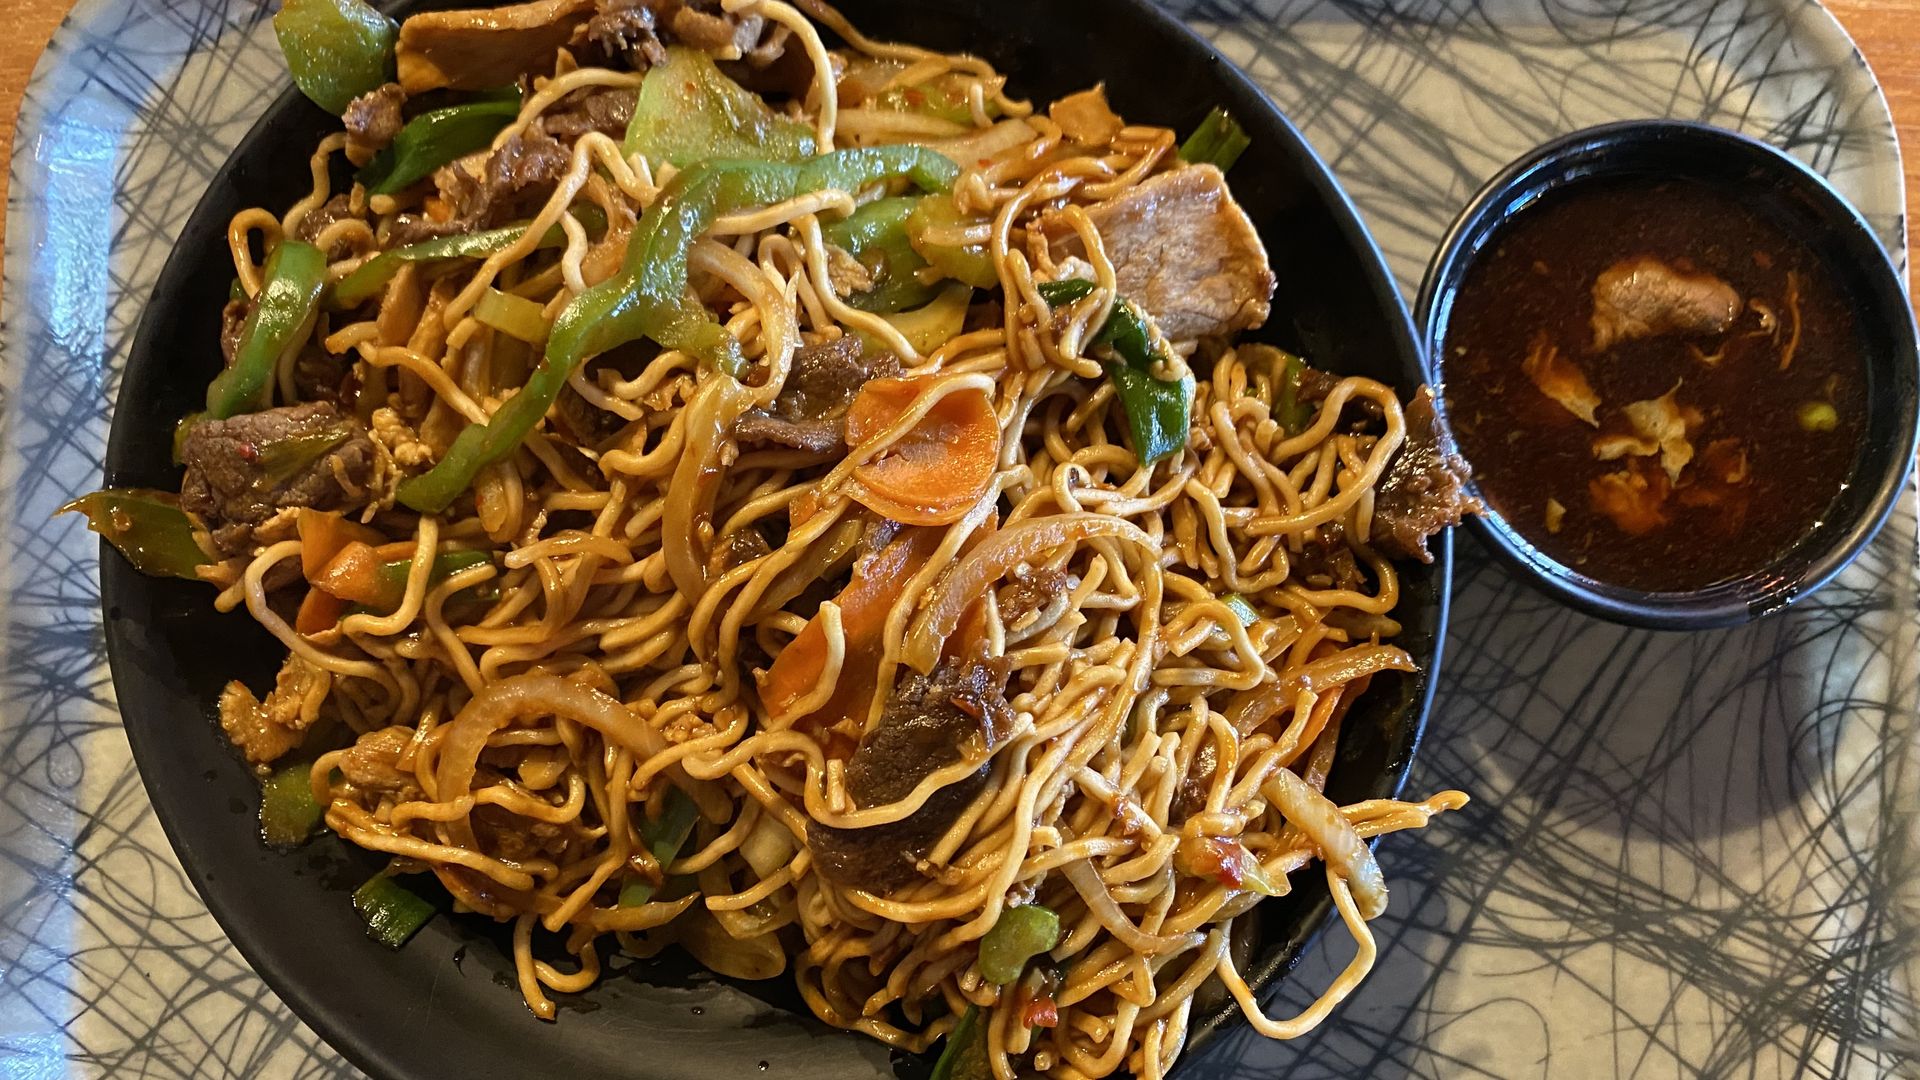 A bowl of stir fry noodles, meat and vegetables